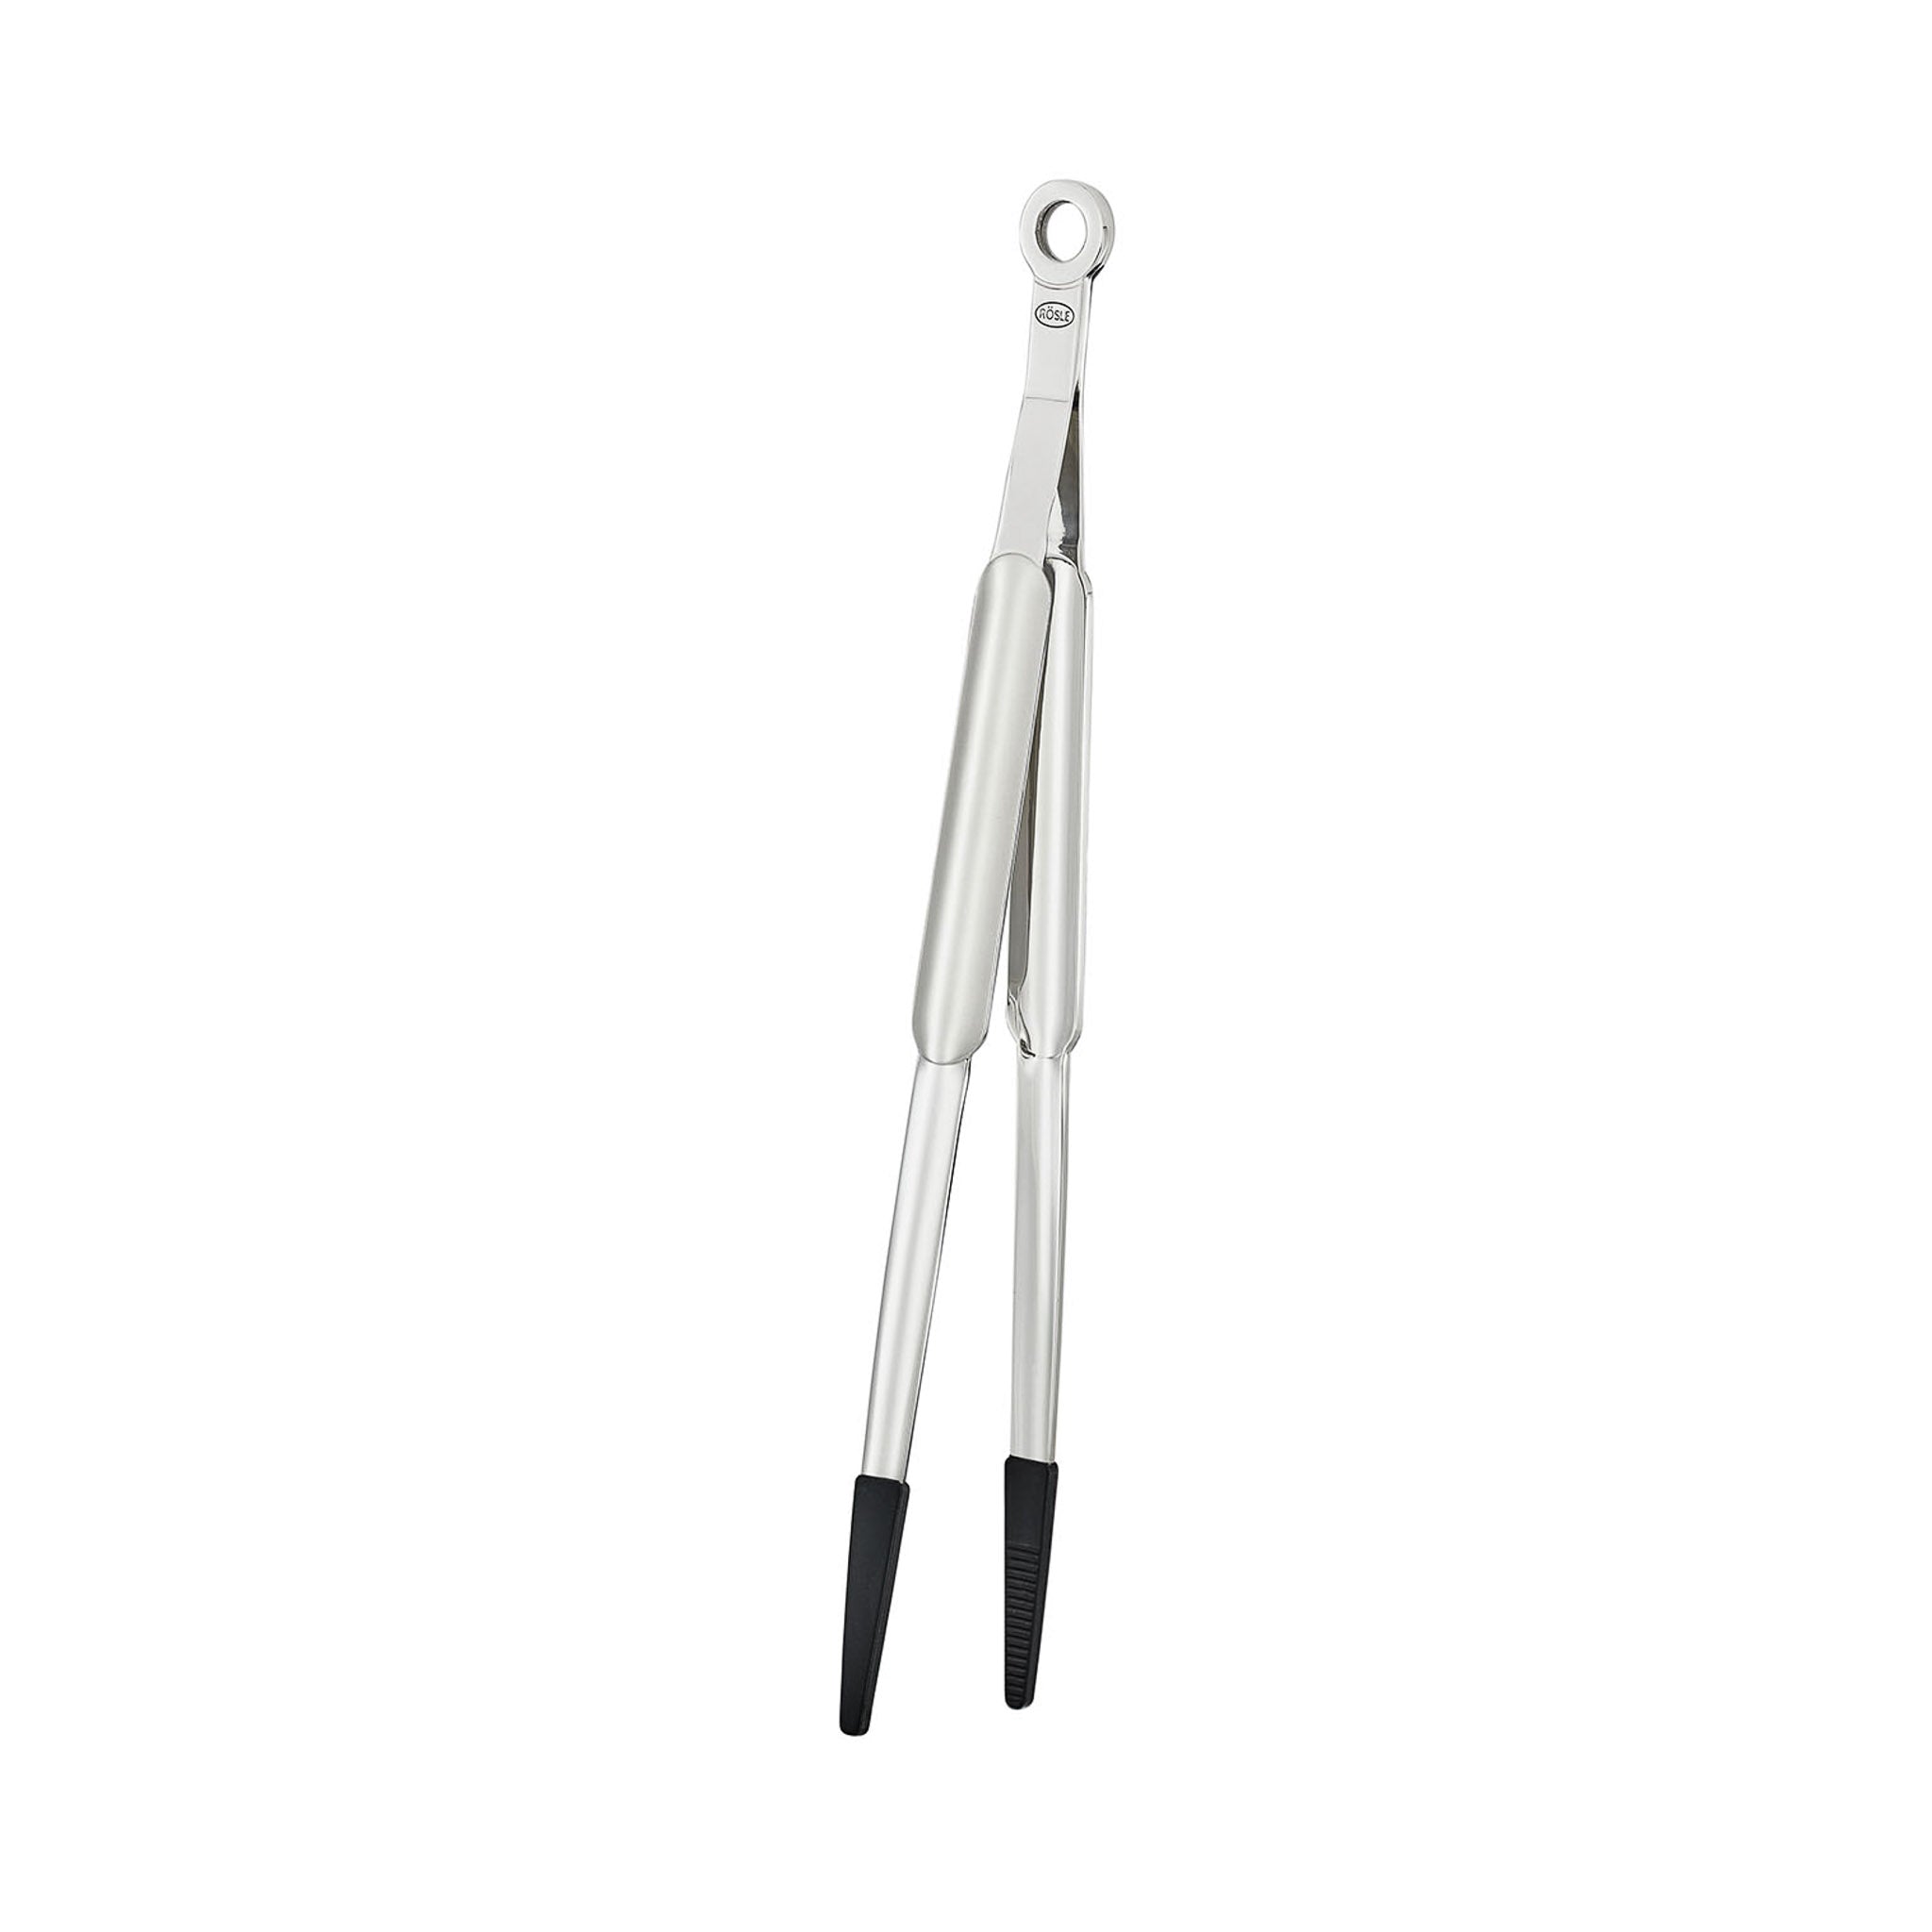 Rosle Modern Classics Fine Tongs with Silicone Tips 32cm